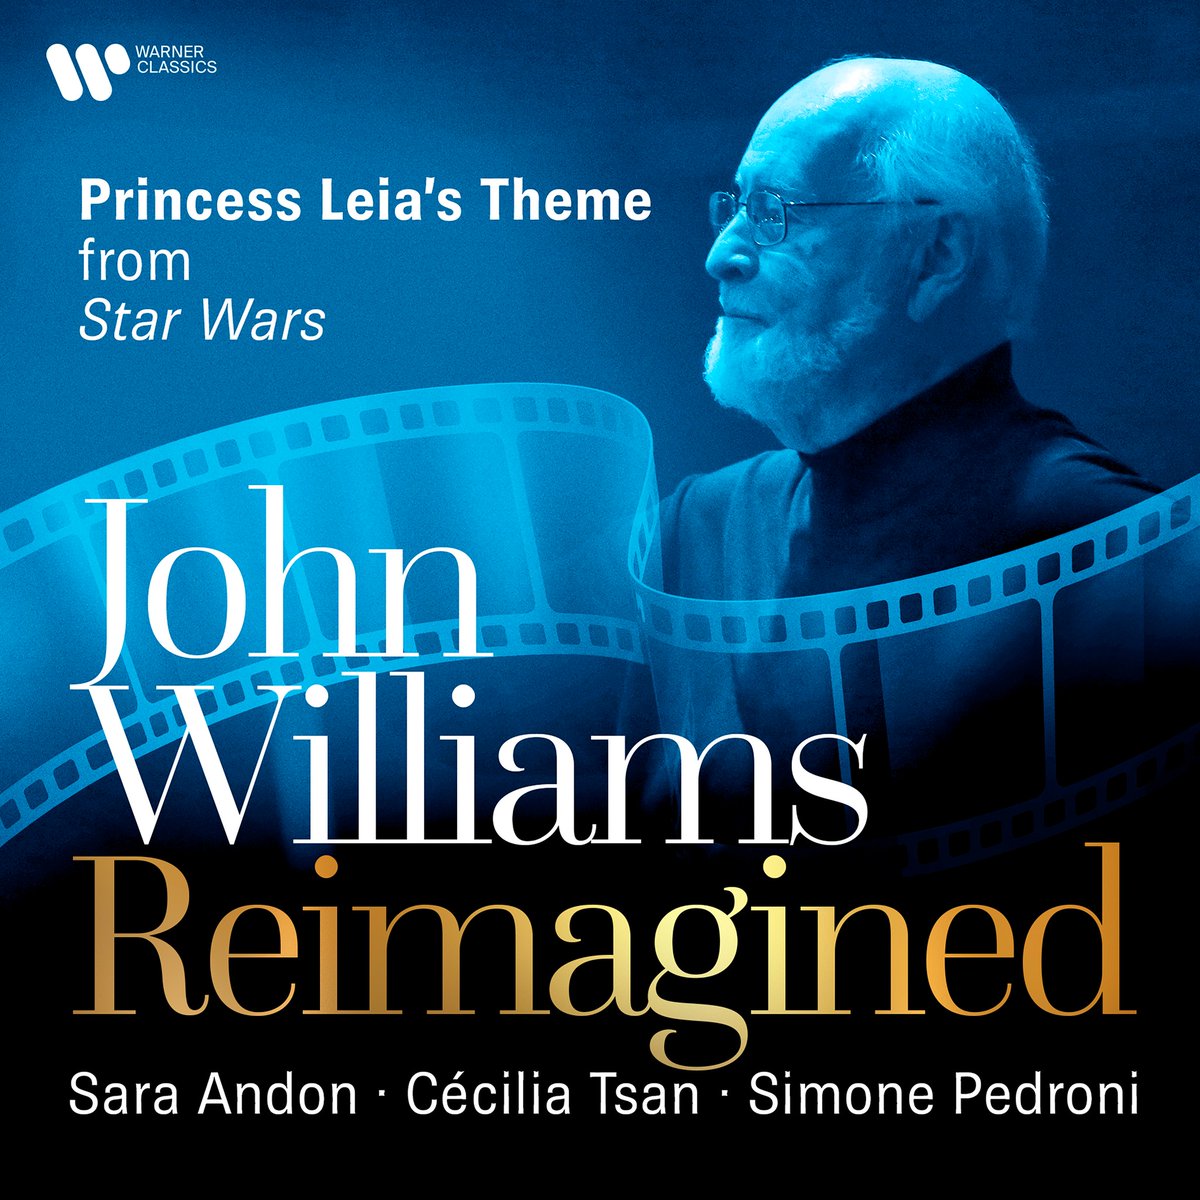 May the 4th be with You - John Williams Reimagined - Princess Leia’s Theme [EN] soundtrackfest.com/en/micro/may-t… [ES] soundtrackfest.com/es/micro/may-t… #MayThe4thBeWithYou @SaraAndon @RobertTownsonP1 @Pedroni_Simone